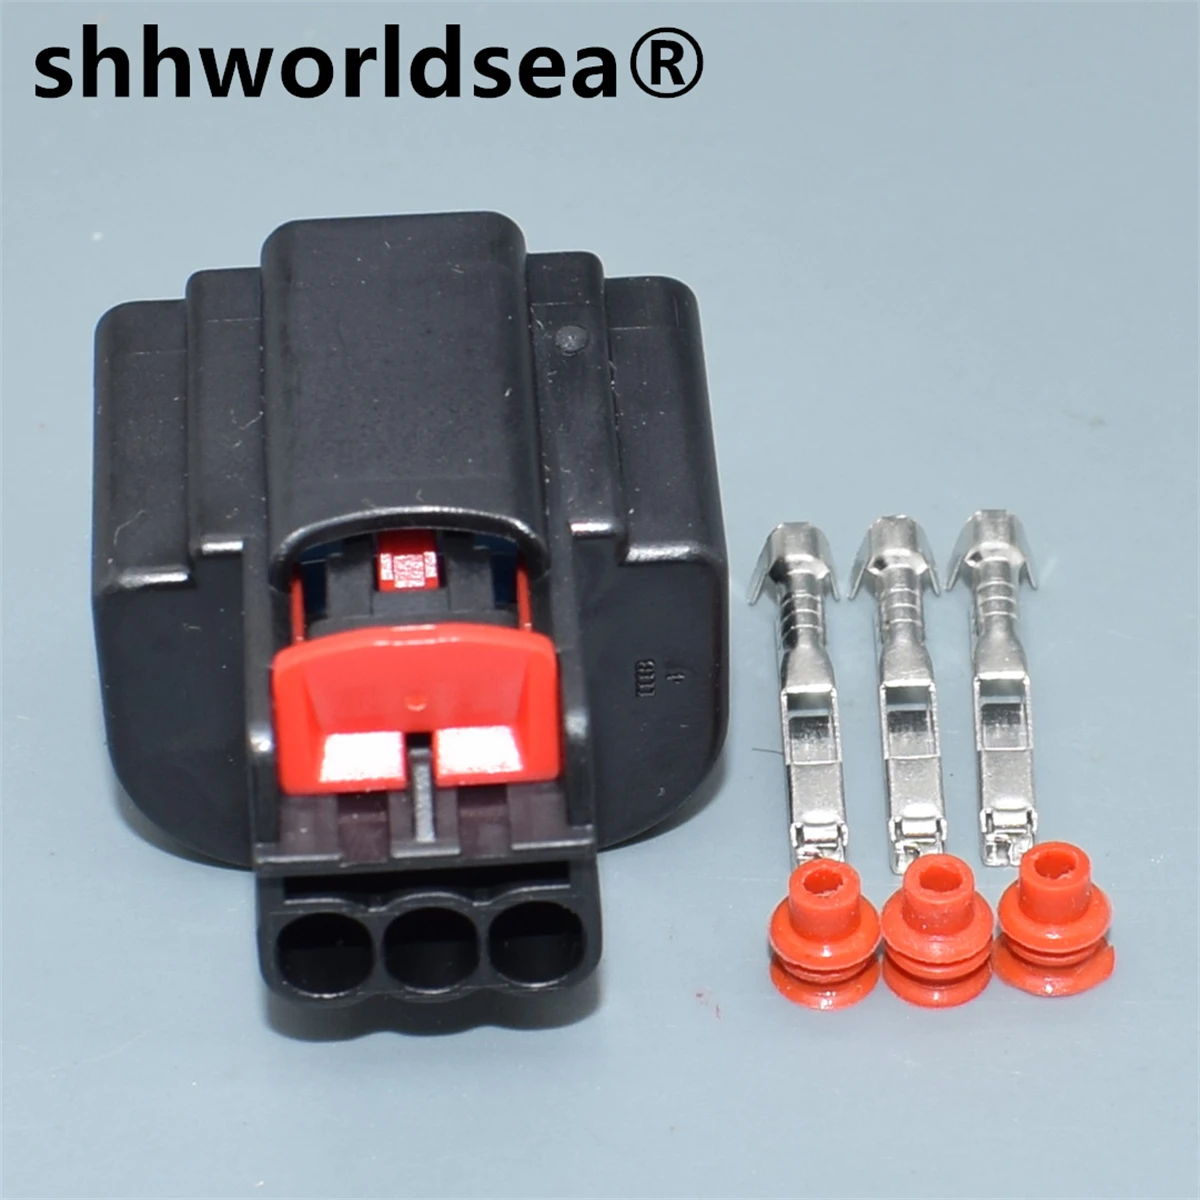 

shhworldsea 3 Pin Automotive Waterproof Ignition Coil Plug Connector Female For BUICK Chevrolet 34250-3065